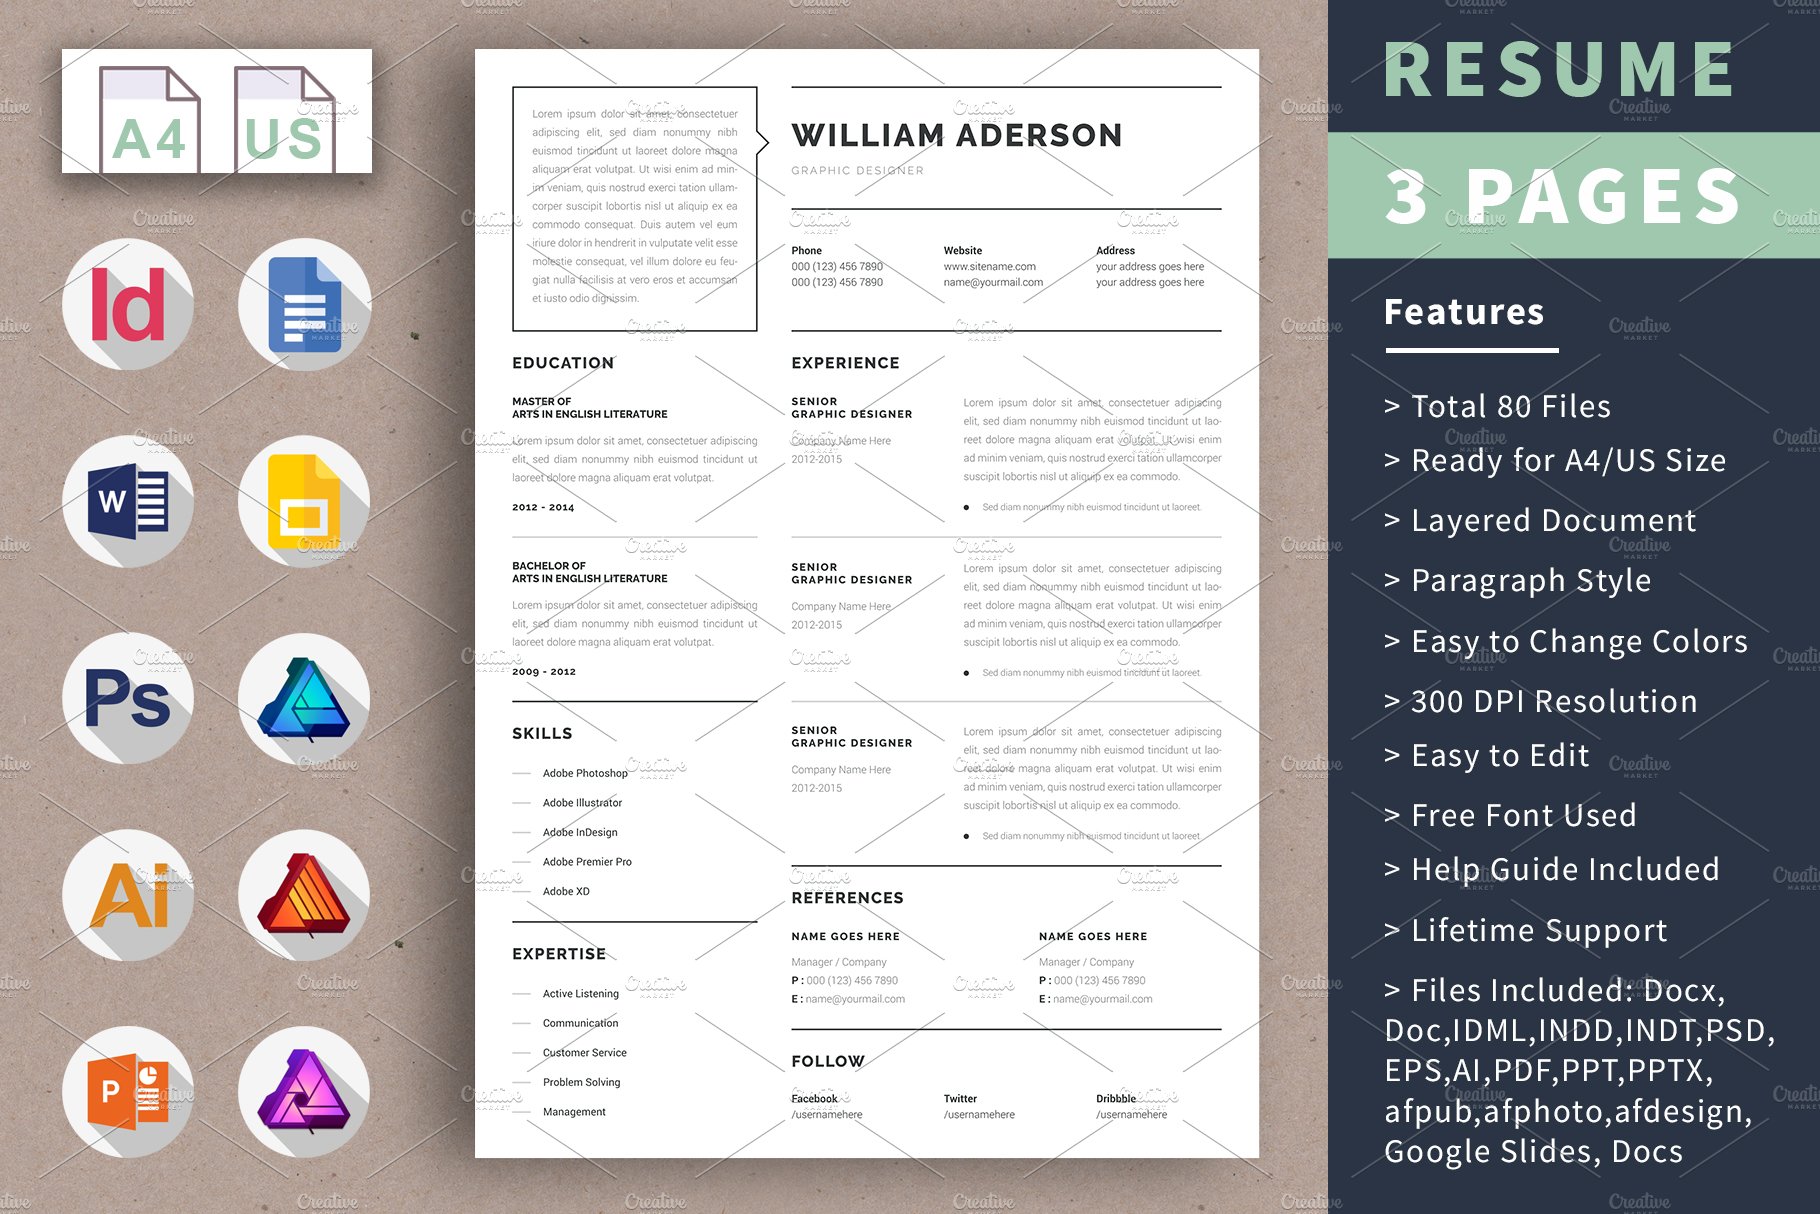 Google docs Resume Template cover image.